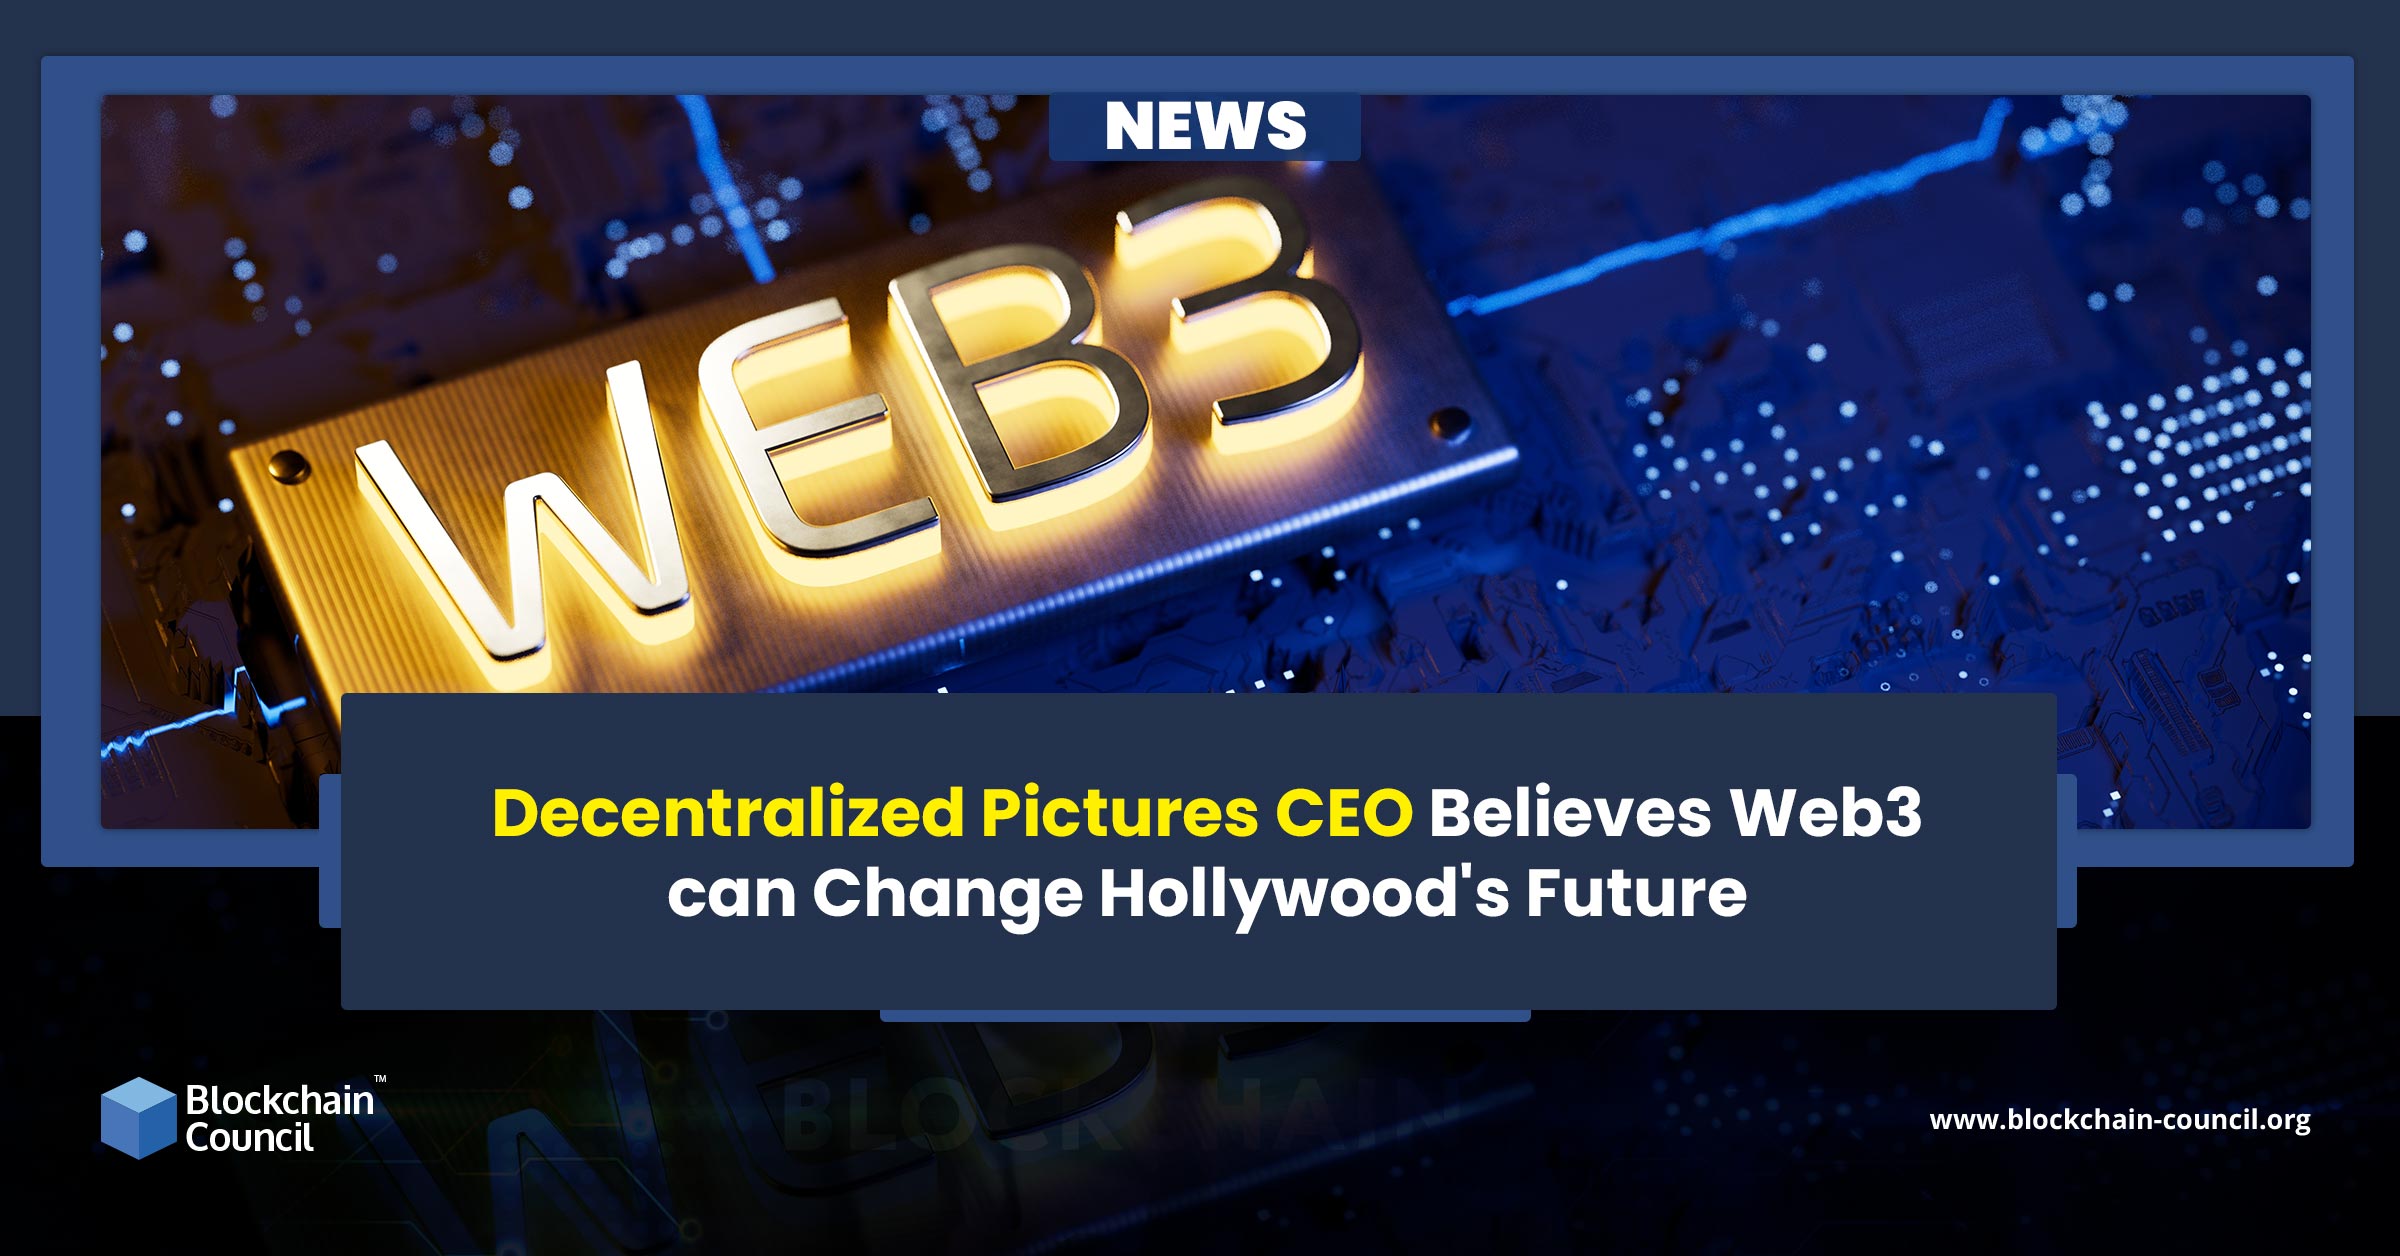 Decentralized Pictures CEO Believes Web3 can Change Hollywood's Future